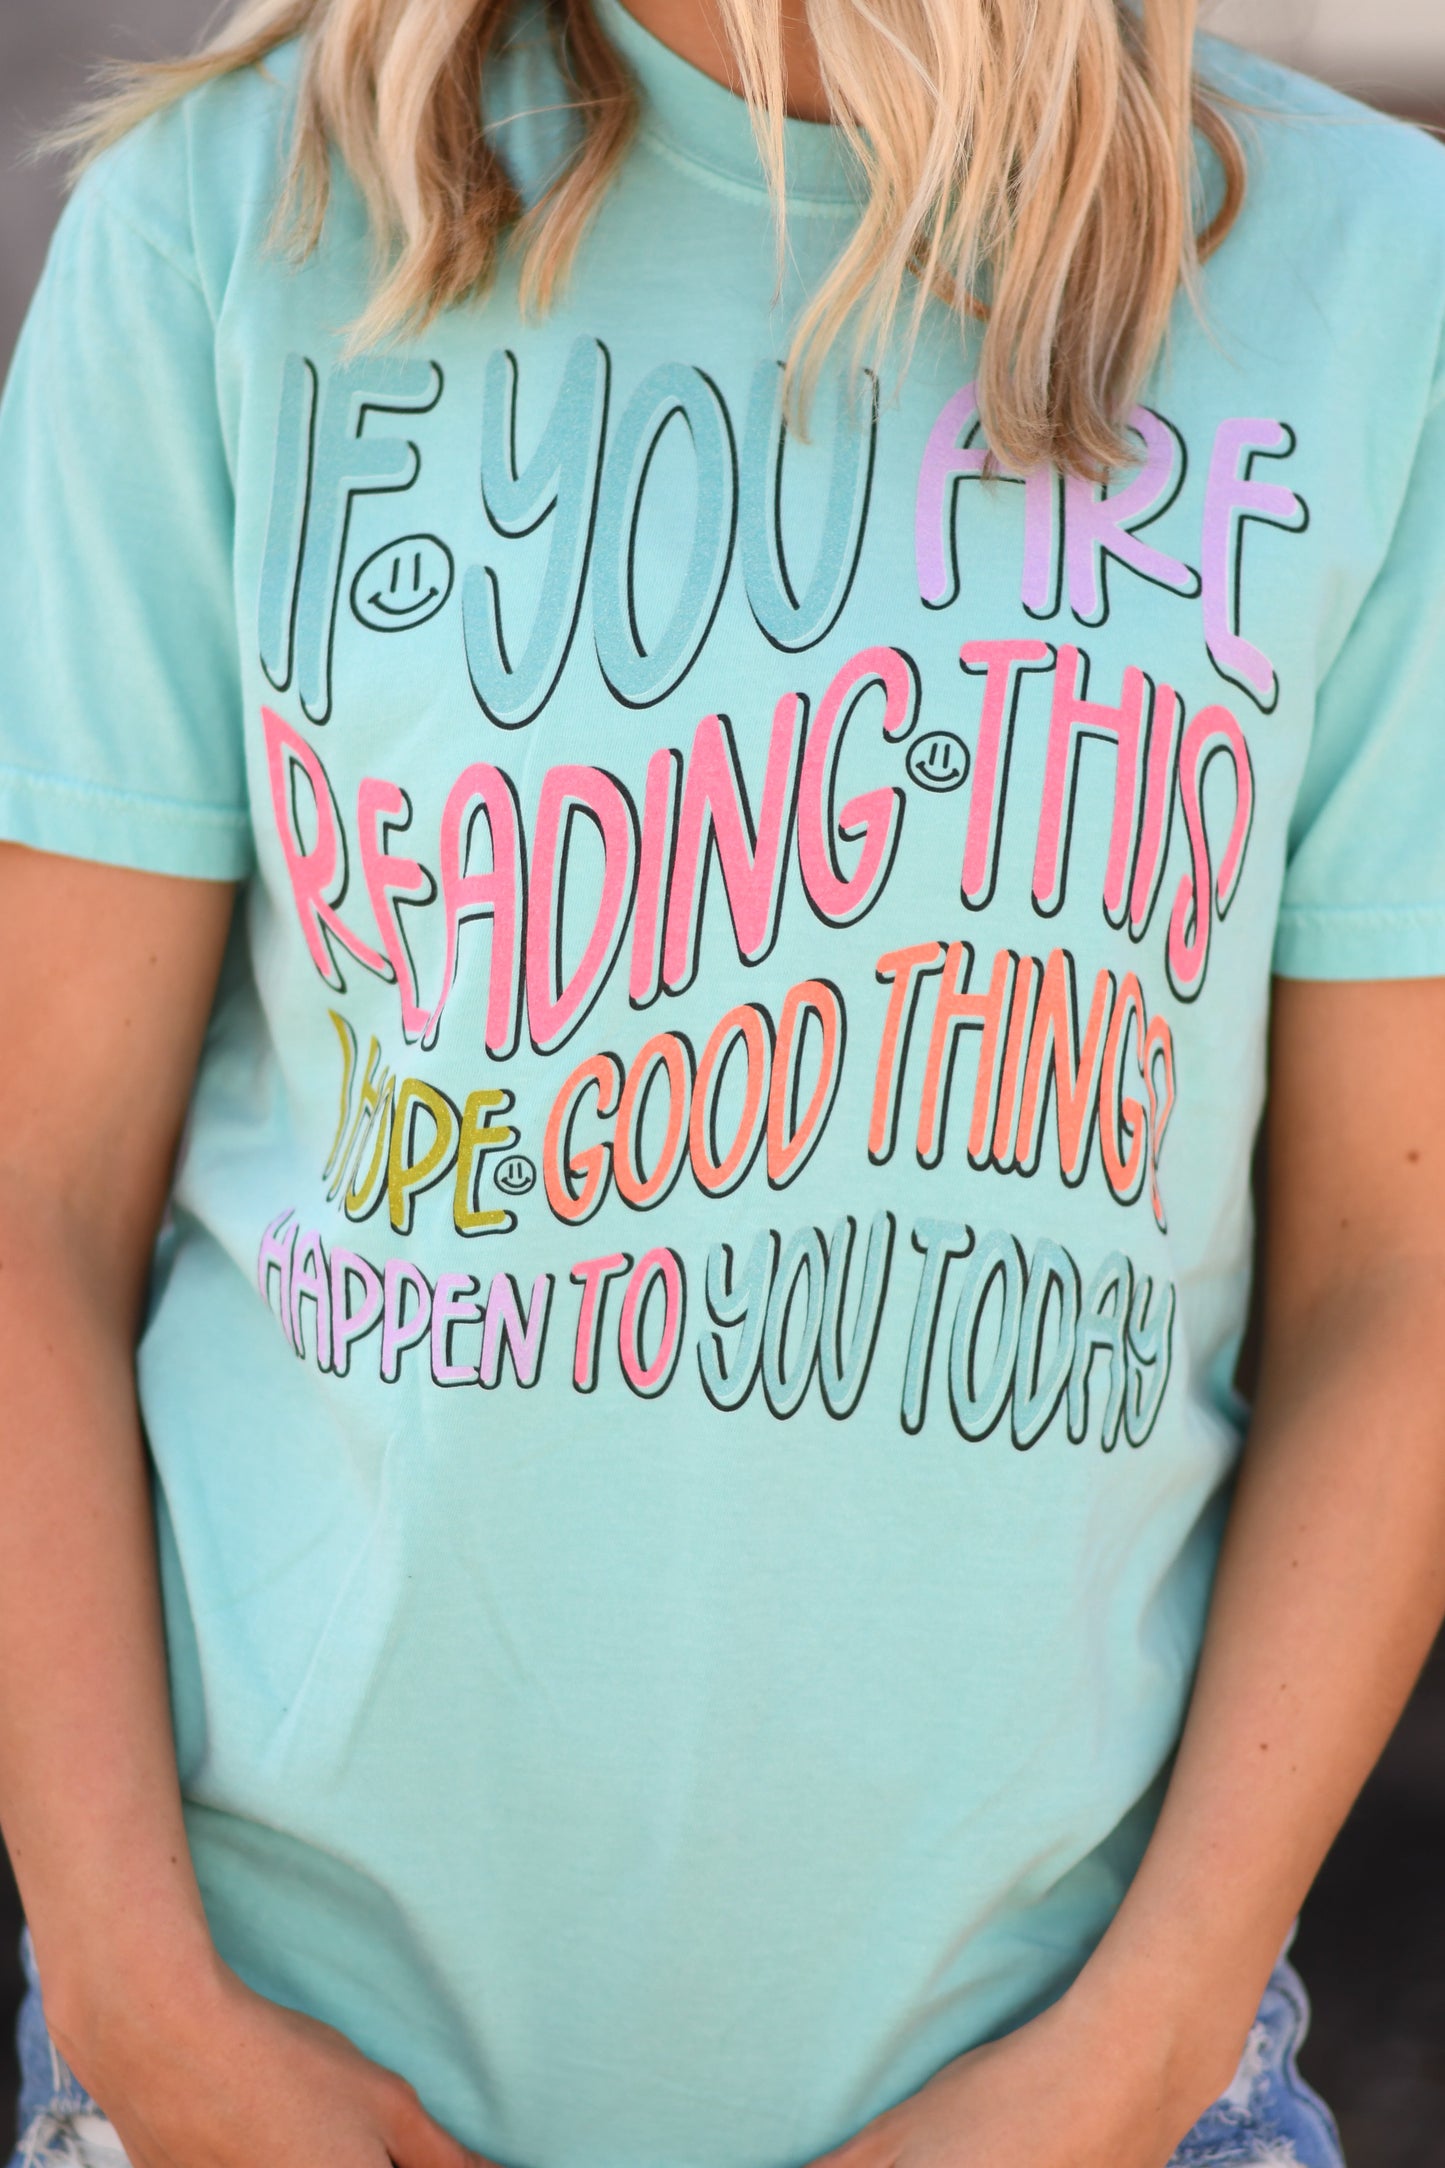 If You Are Reading This I Hope Good Things Happen To You Today Graphic Tee